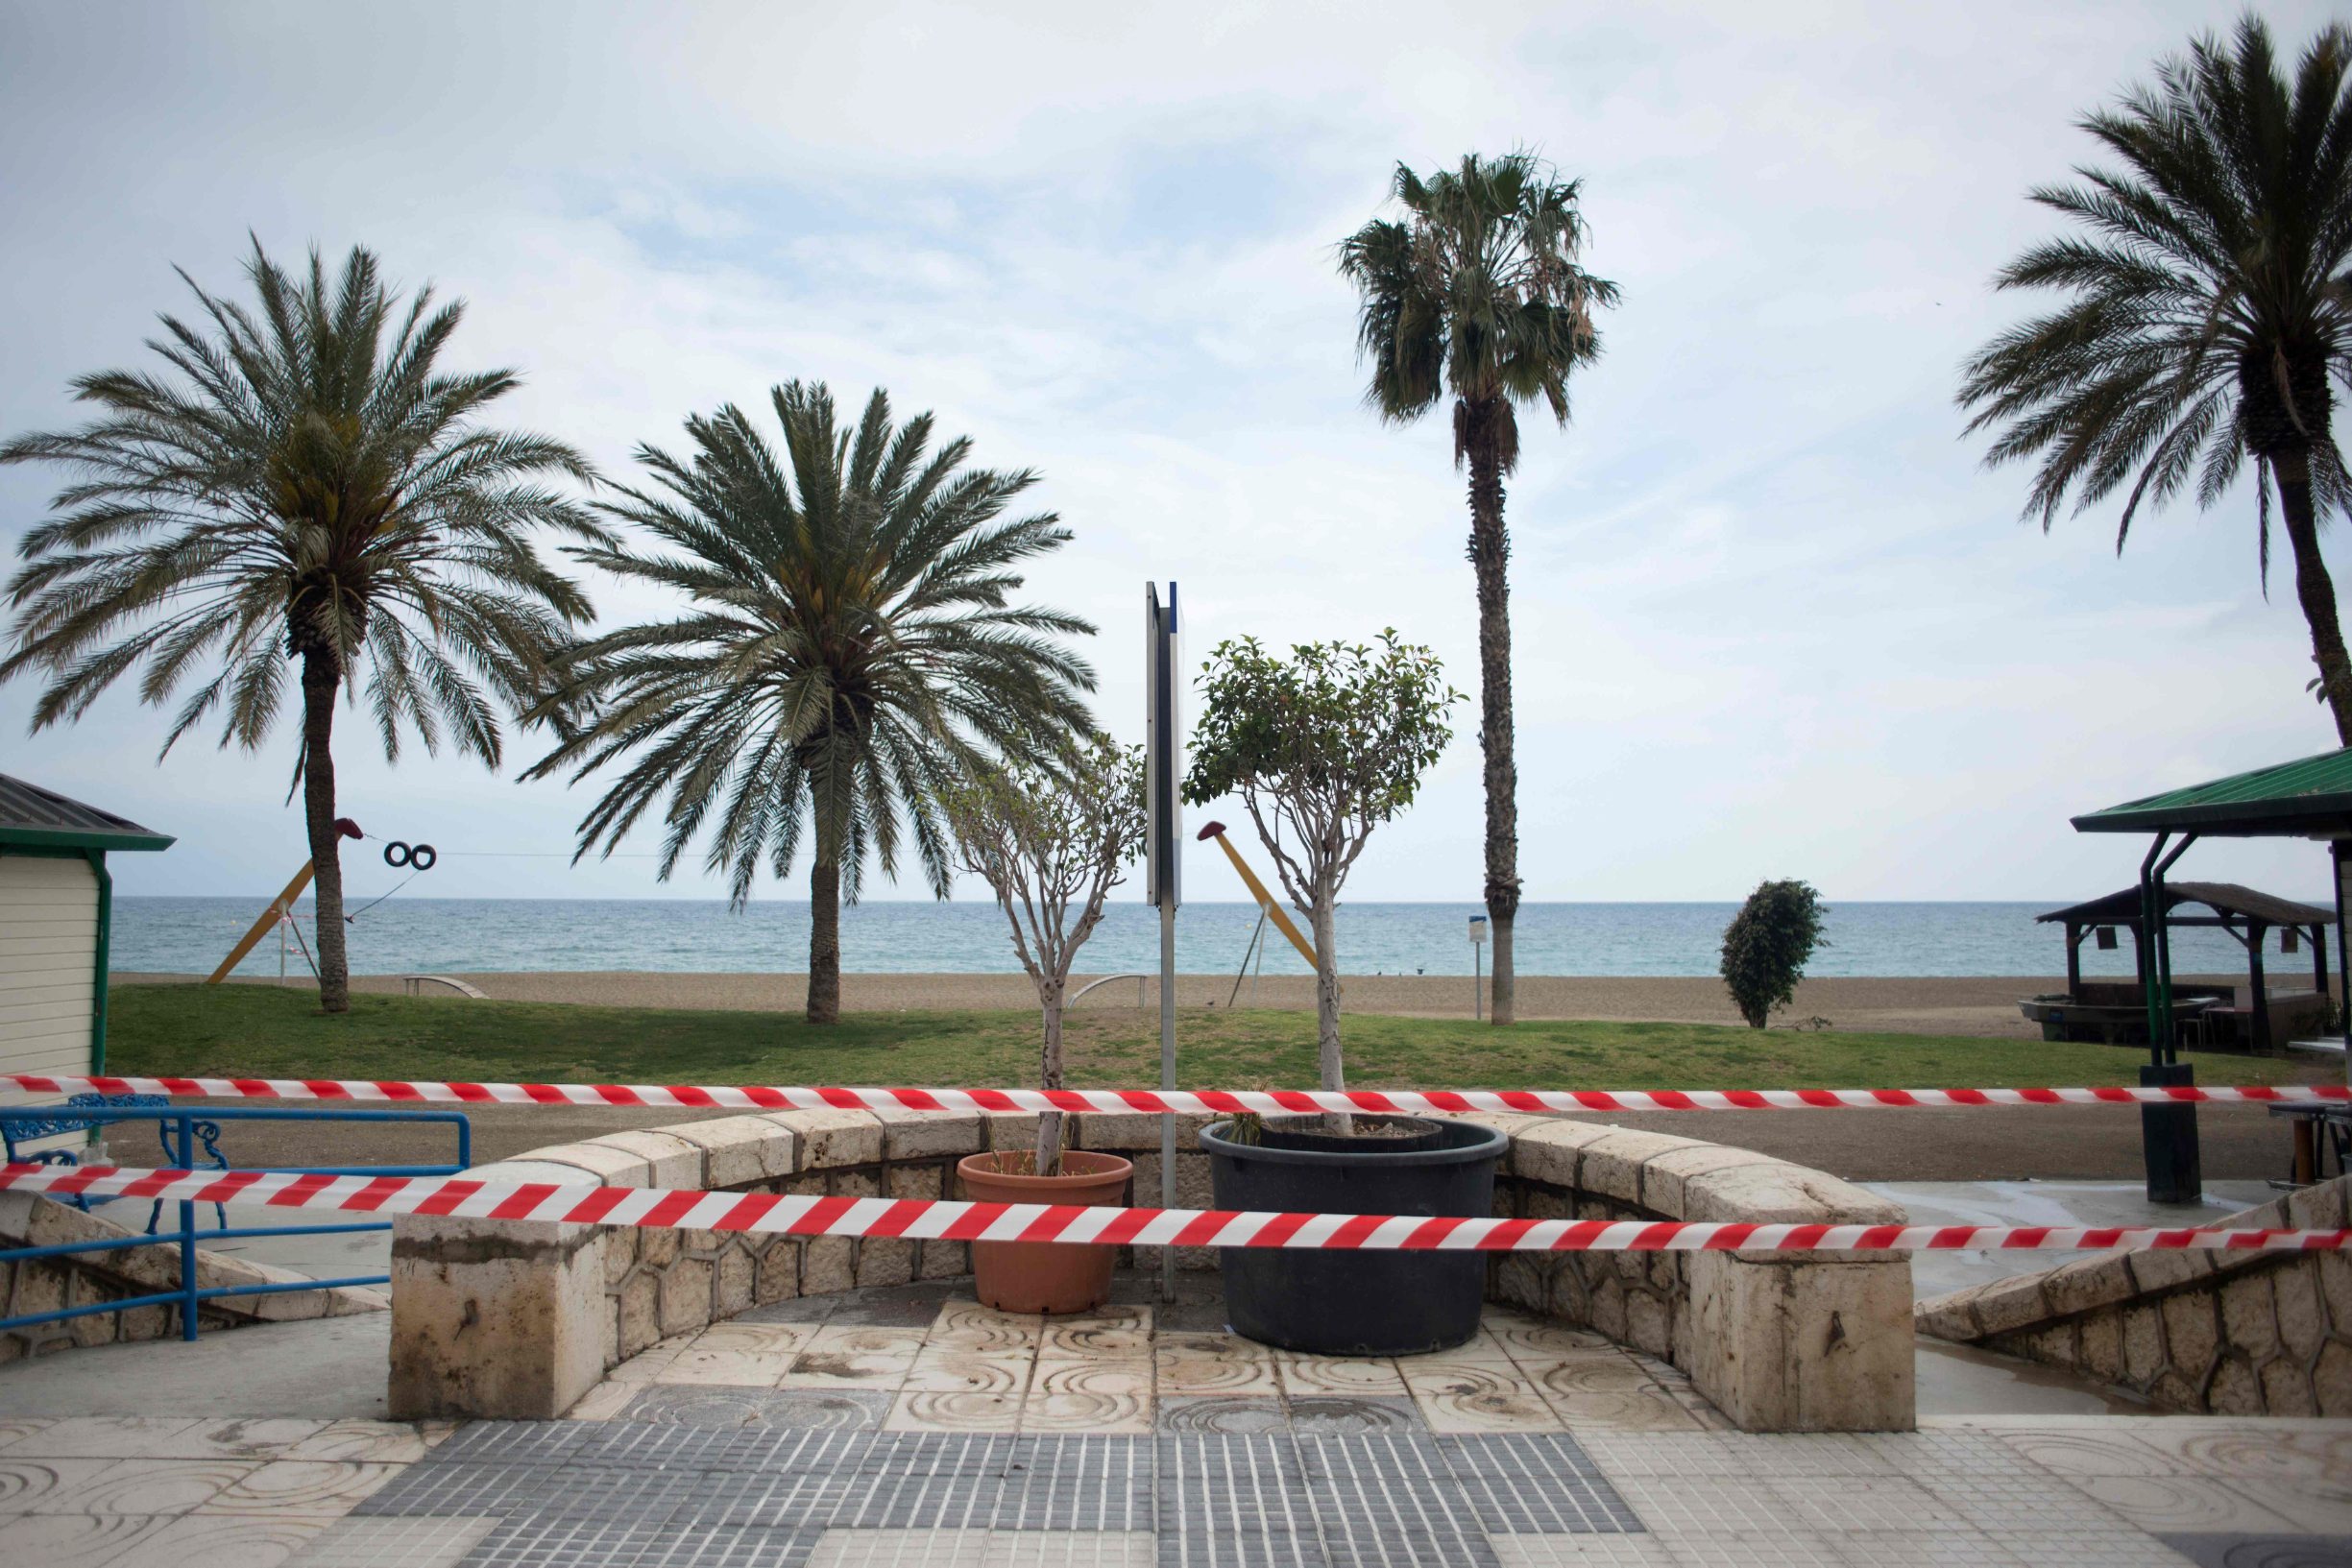 The Malagueta beach is cordoned off in Malaga on March 15, 2020. - France and Spain are the latest European nations to severely curtail people's movements as countries across the Americas and Asia impose travel restrictions in a widening crisis over coronavirus, as the number of infections around the world passed 150,000, with nearly 6,000 deaths. (Photo by JORGE GUERRERO / AFP)